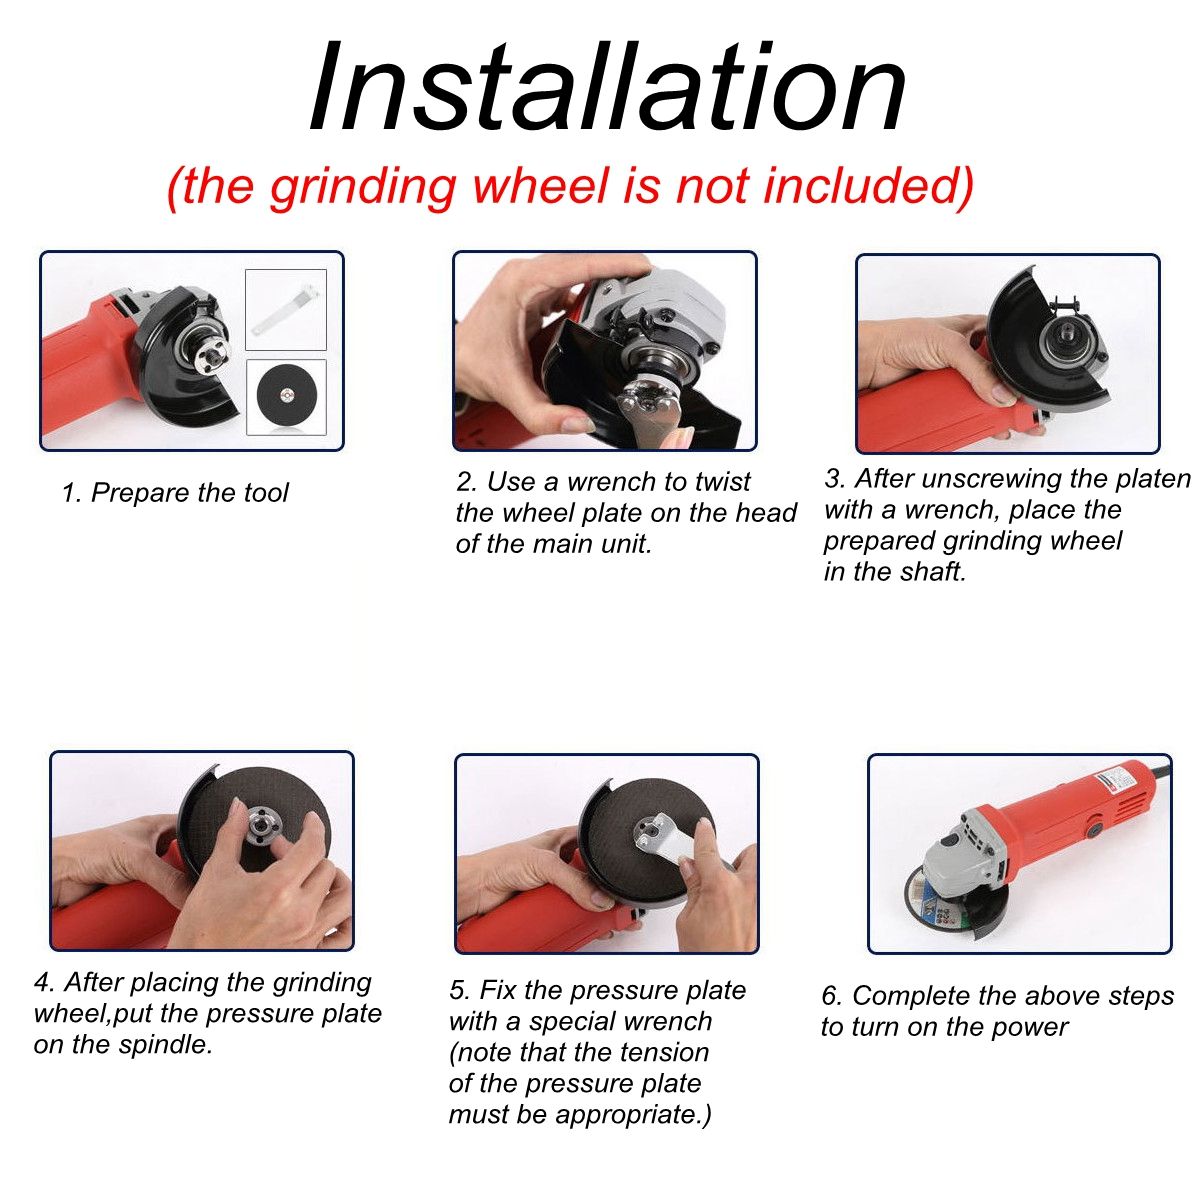 ZS-980-220V-980W-Protable-Electric-Angle-Grinder-Muti-Function-Cutting-Polishing-Tools-Hand-Grinding-1413130